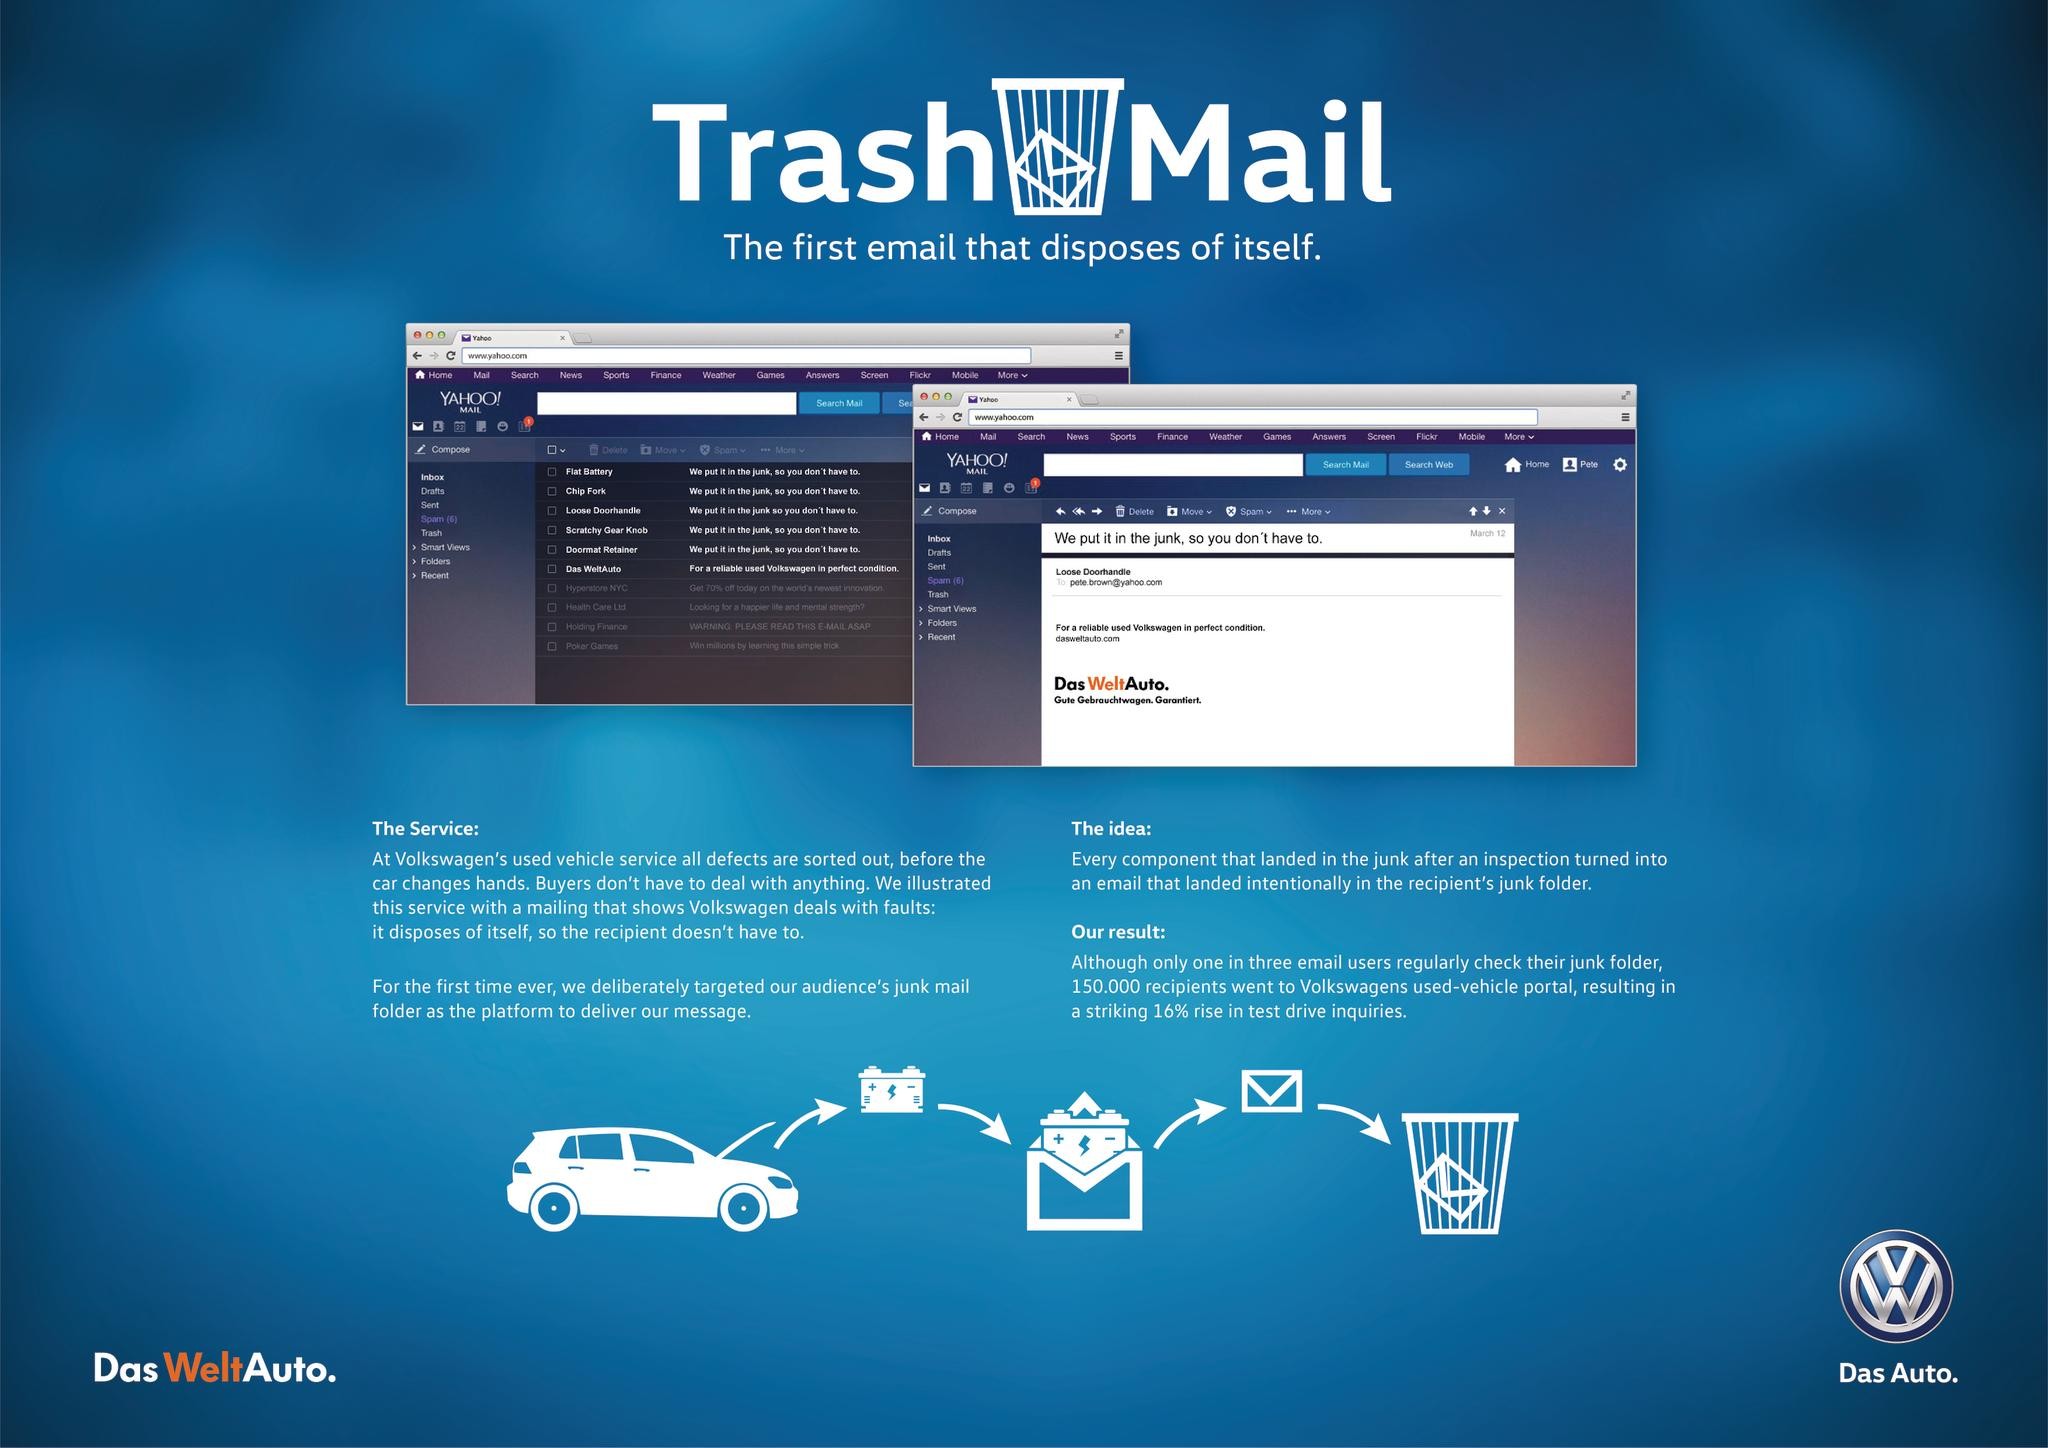 TRASH MAIL. THE FIRST E-MAIL THAT DISPOSES OF ITSELF.